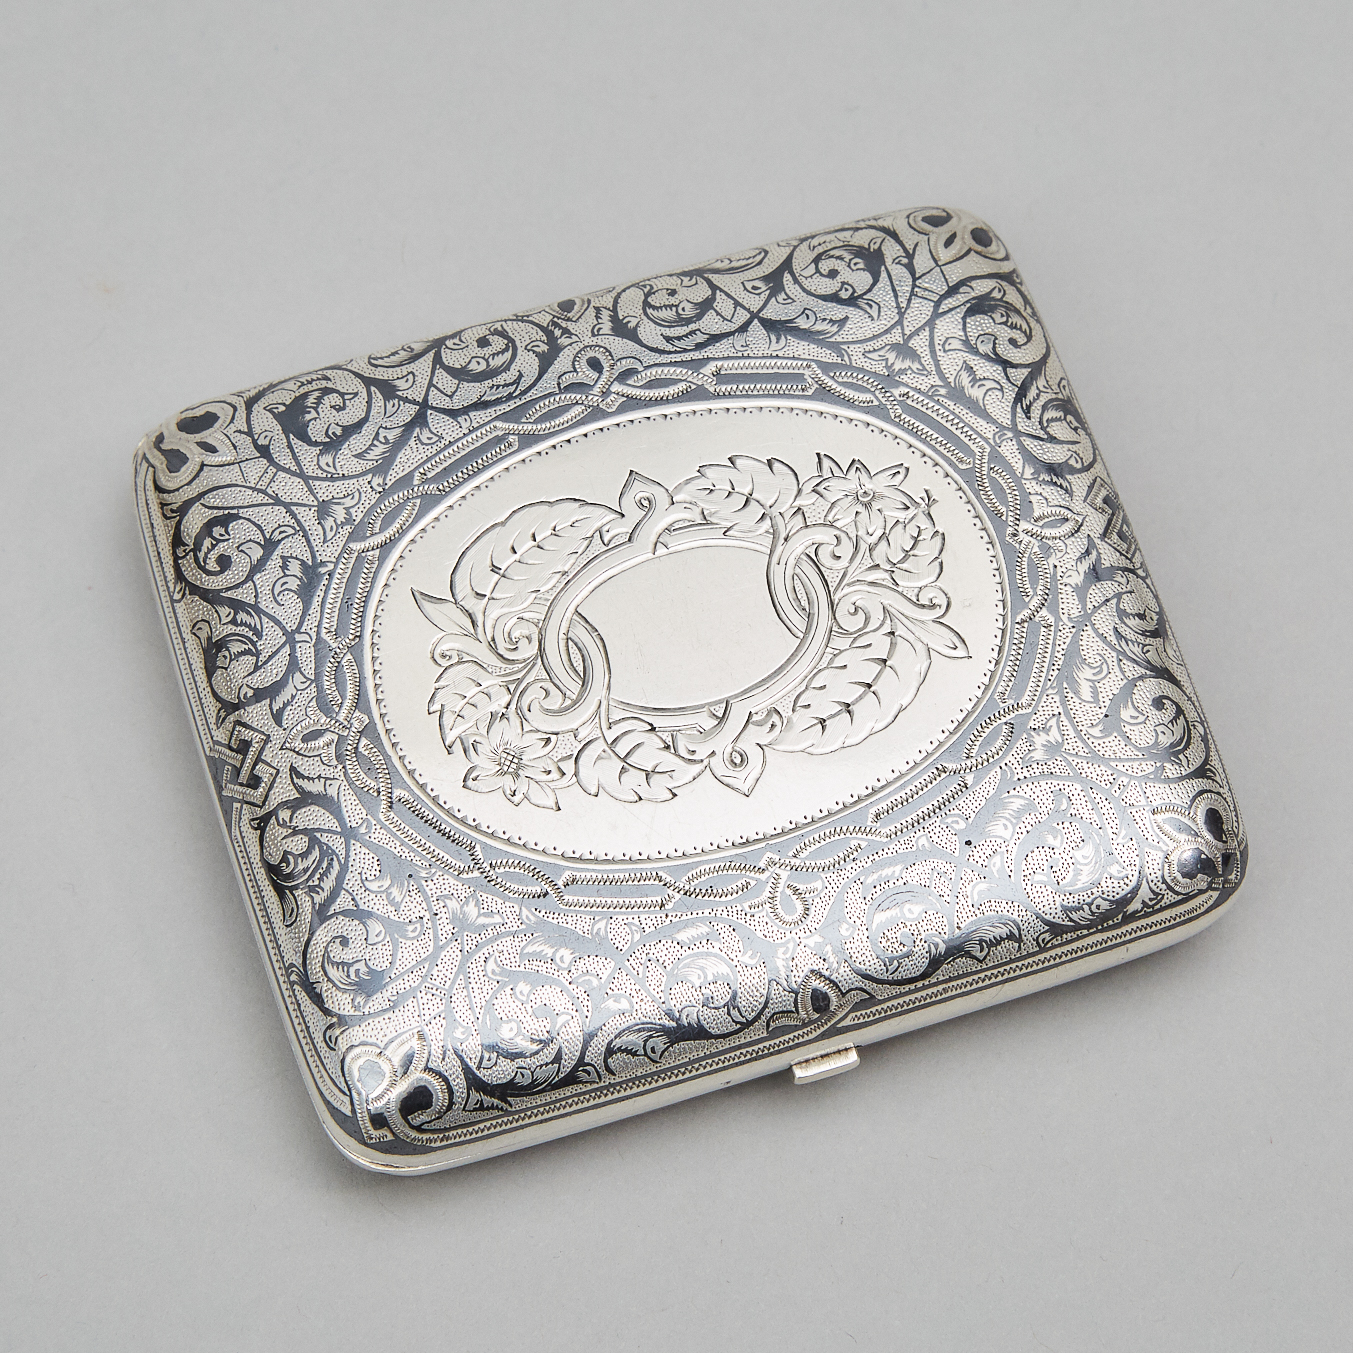 Russian Engraved and Nielloed Silver Cigarette Case, Ivan Saltikov, Moscow, 1891